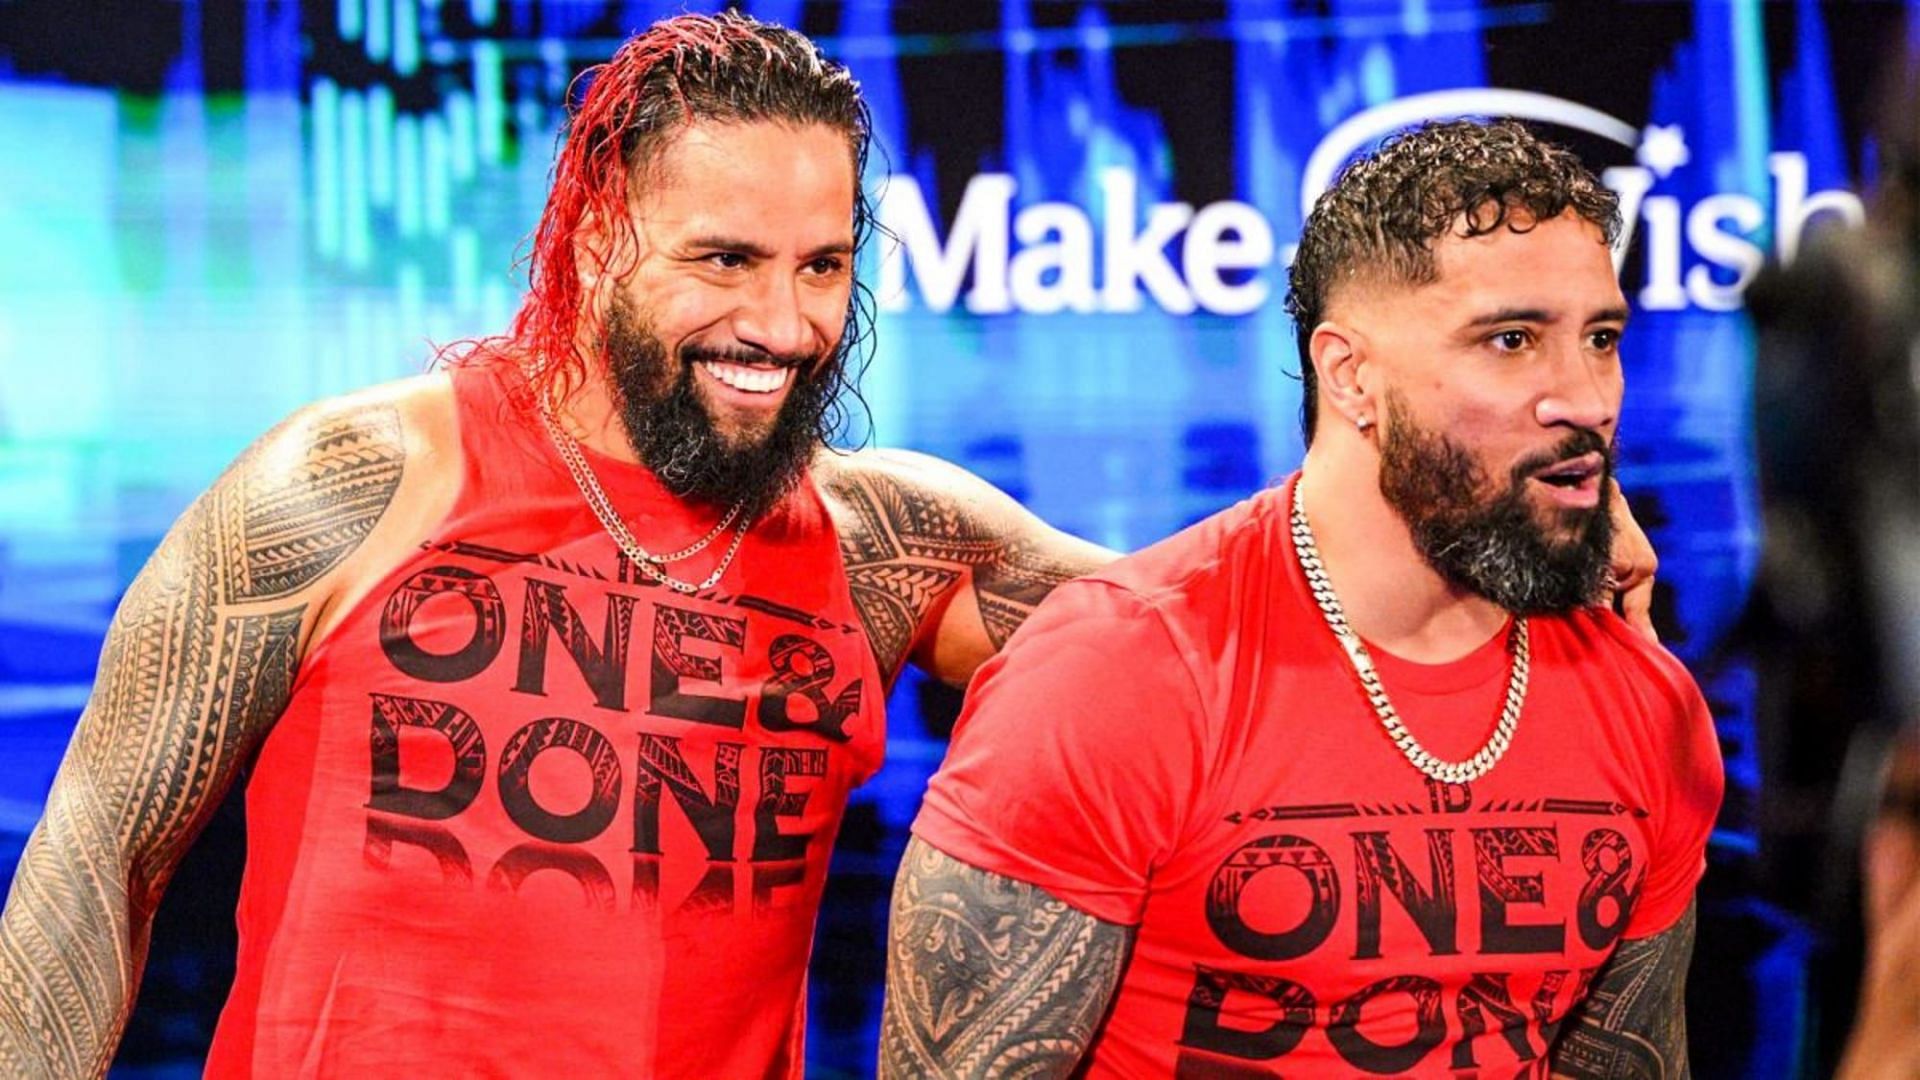 The Usos are the longest reigning WWE tag team champions